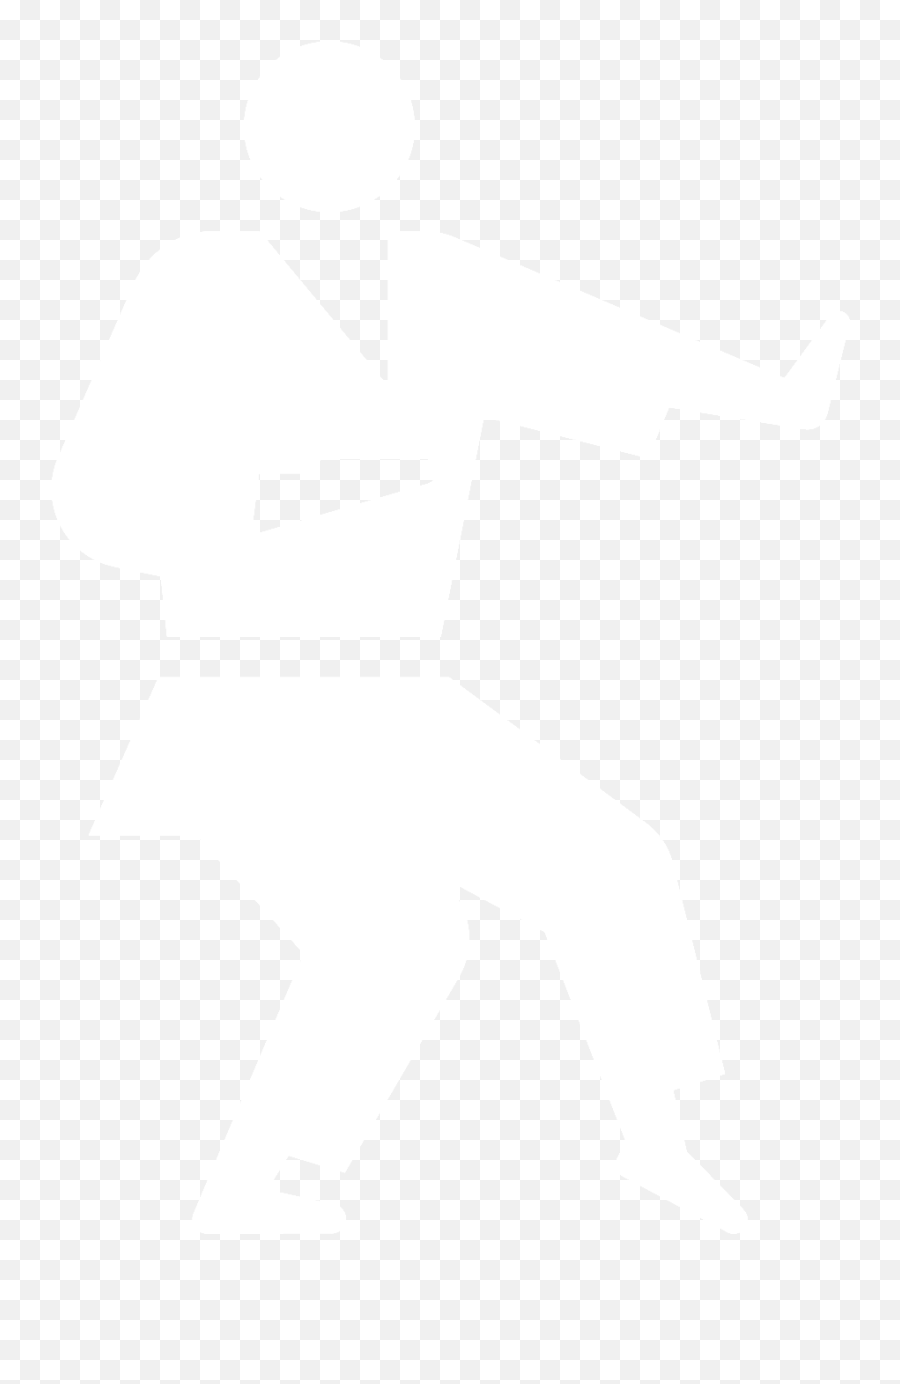 Exciting New Sports Added To Tokyo 2020 - Cbc U0026 Radio Karate Kata Pictogram Png,Tokyo Olympics Icon